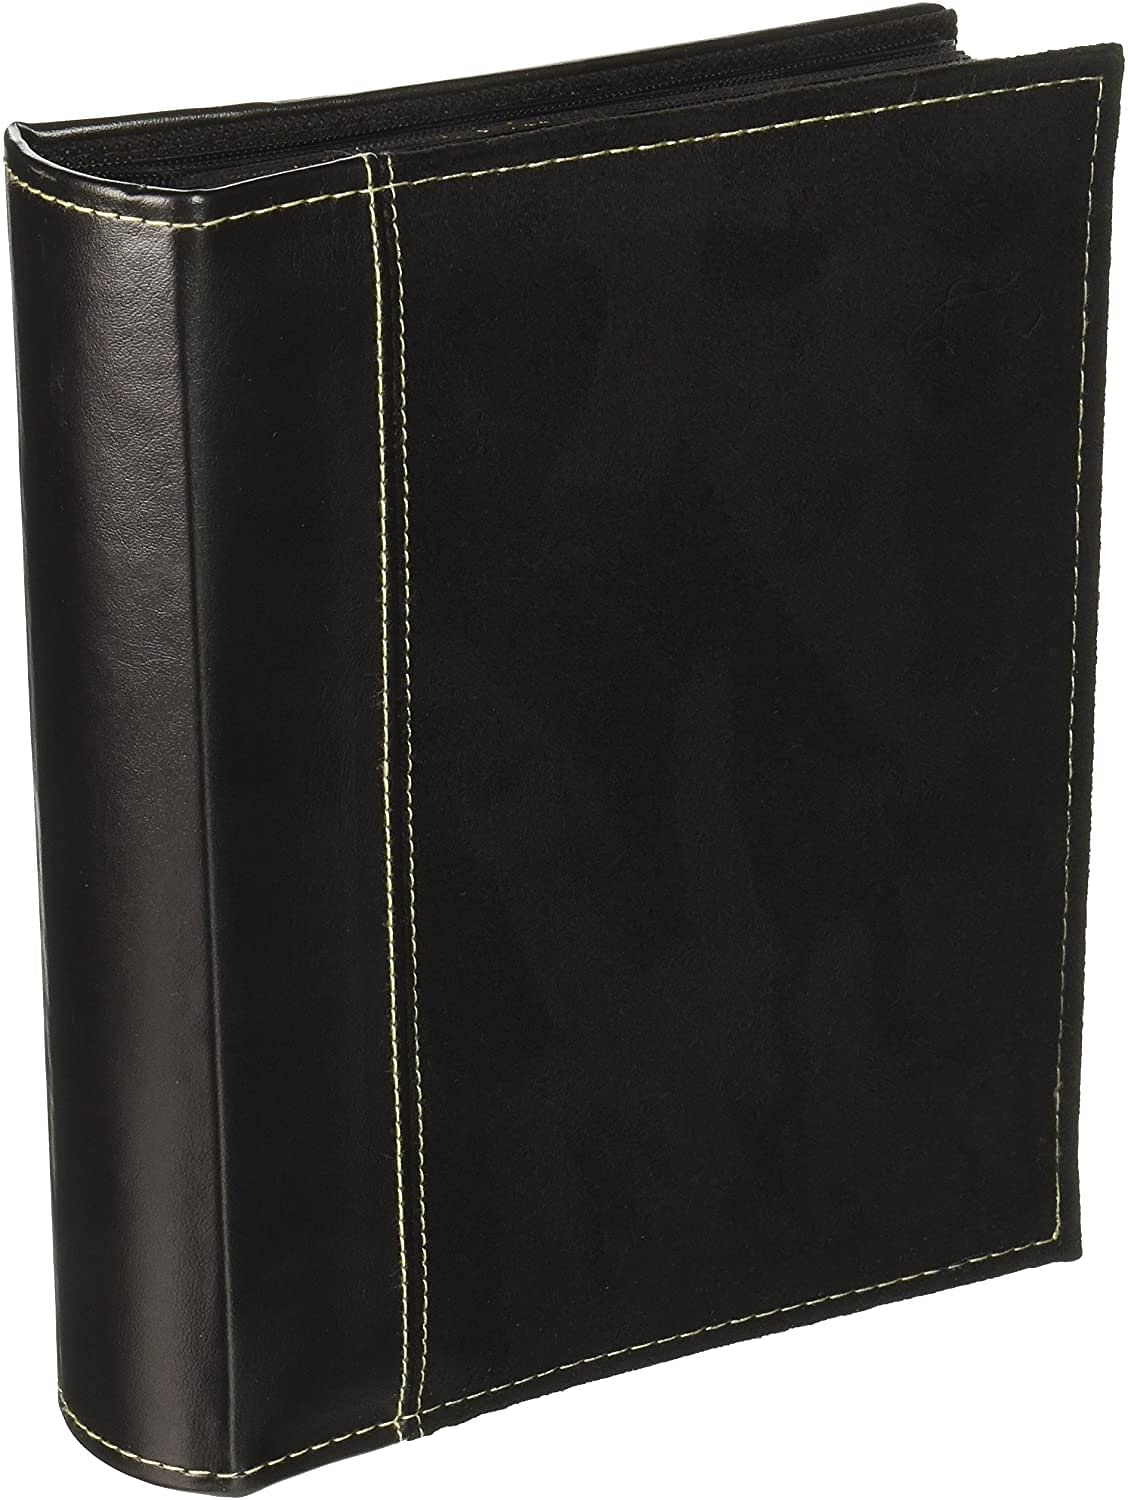 Pioneer SU-246/BK Photo Albums 208 Pocket Sewn Faux Suede and Leatherette Cover Album for 4 by 6-Inch Prints, Black